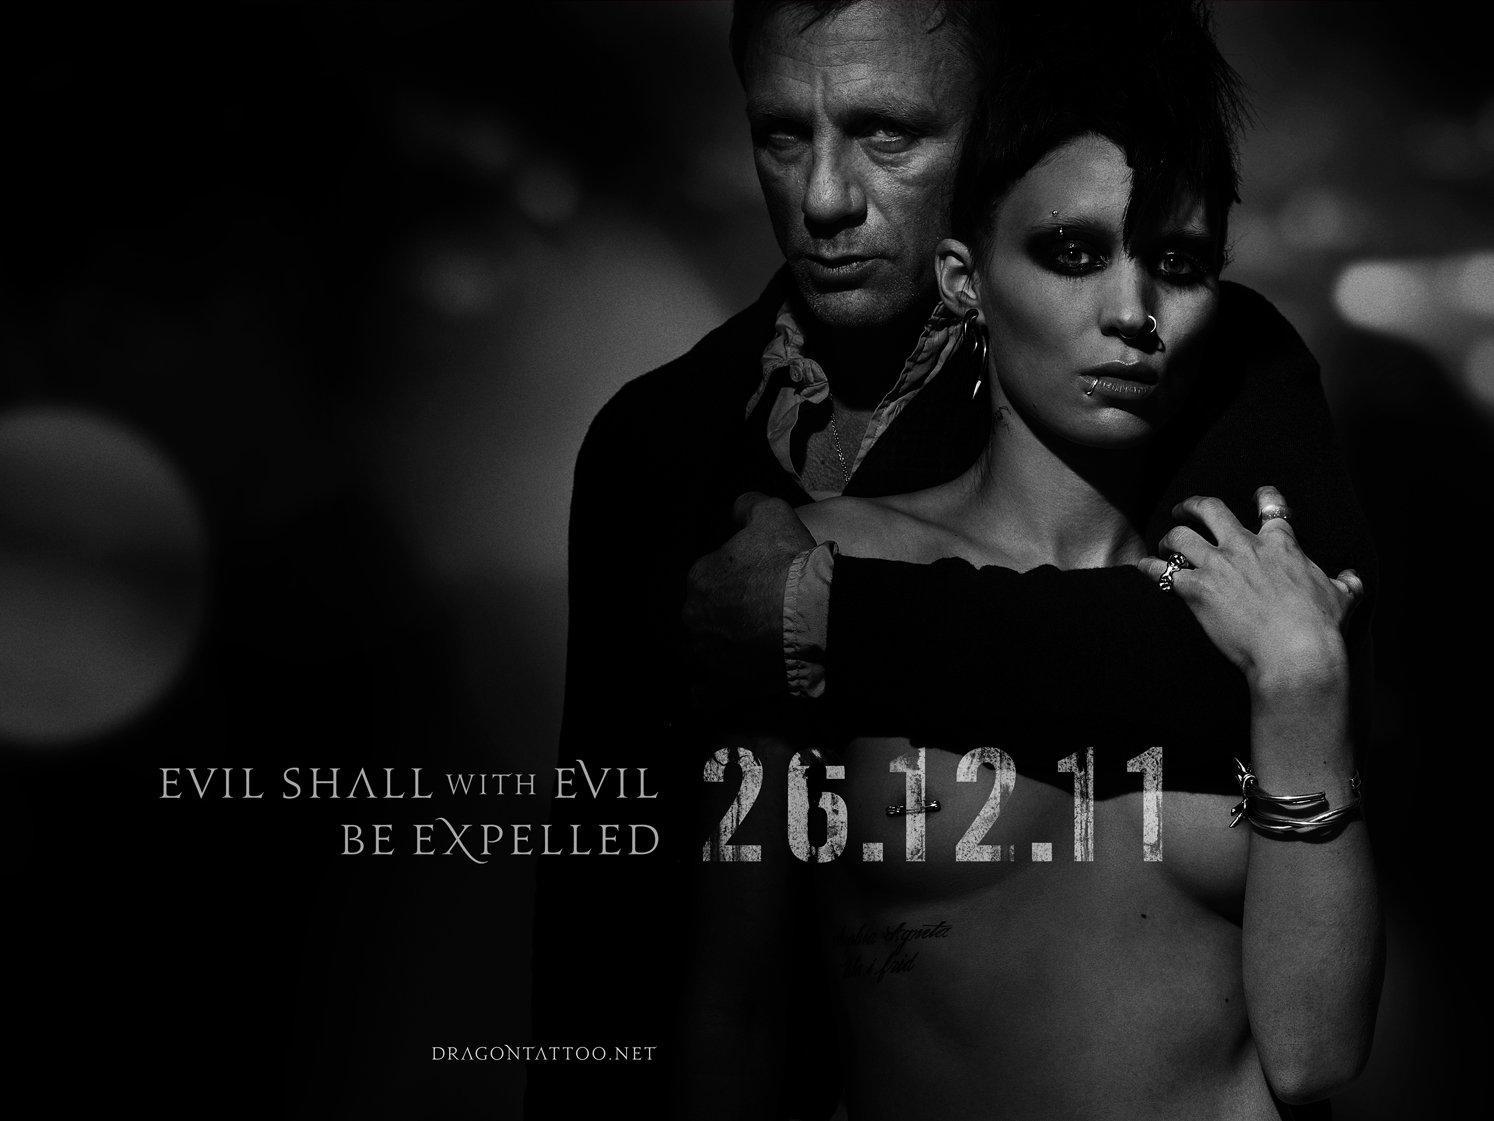 Image gallery for The Girl with the Dragon Tattoo - FilmAffinity